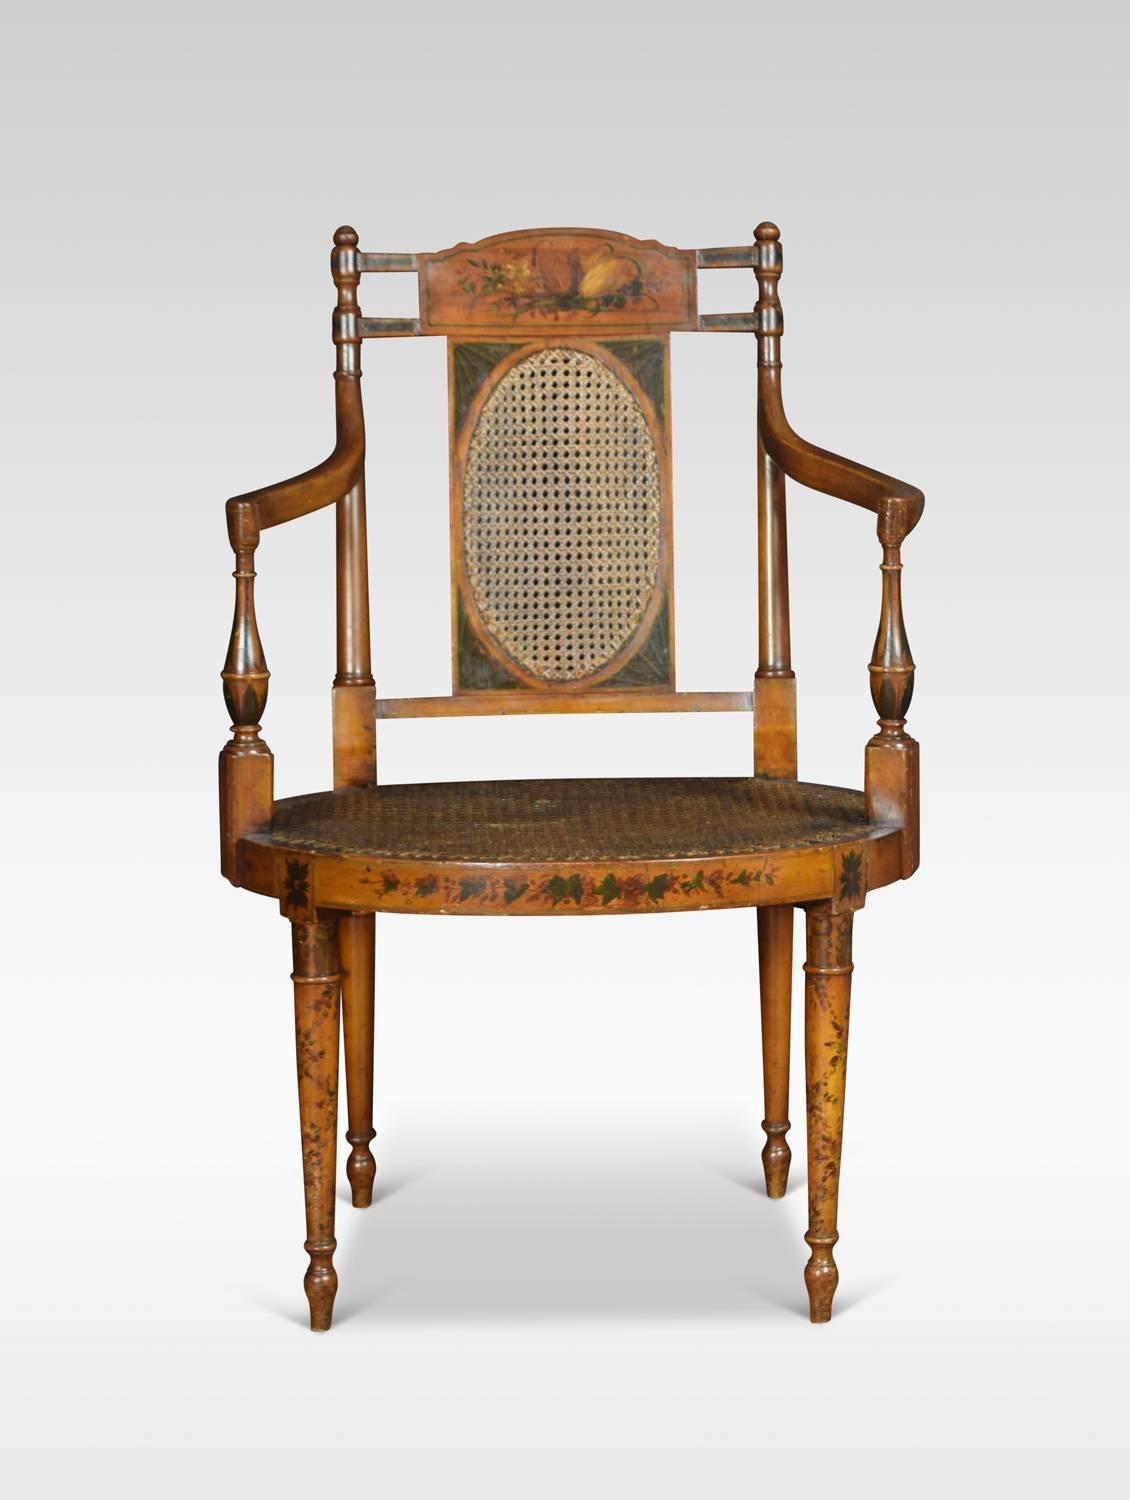 Edwardian satinwood armchair, the shaped back with neoclassical painted design and inset bergere back and seat, with removable upholstered cushion. Flanked by out swept arms. All raised up on four turned tapering legs.
Dimensions
Height 37 Inches